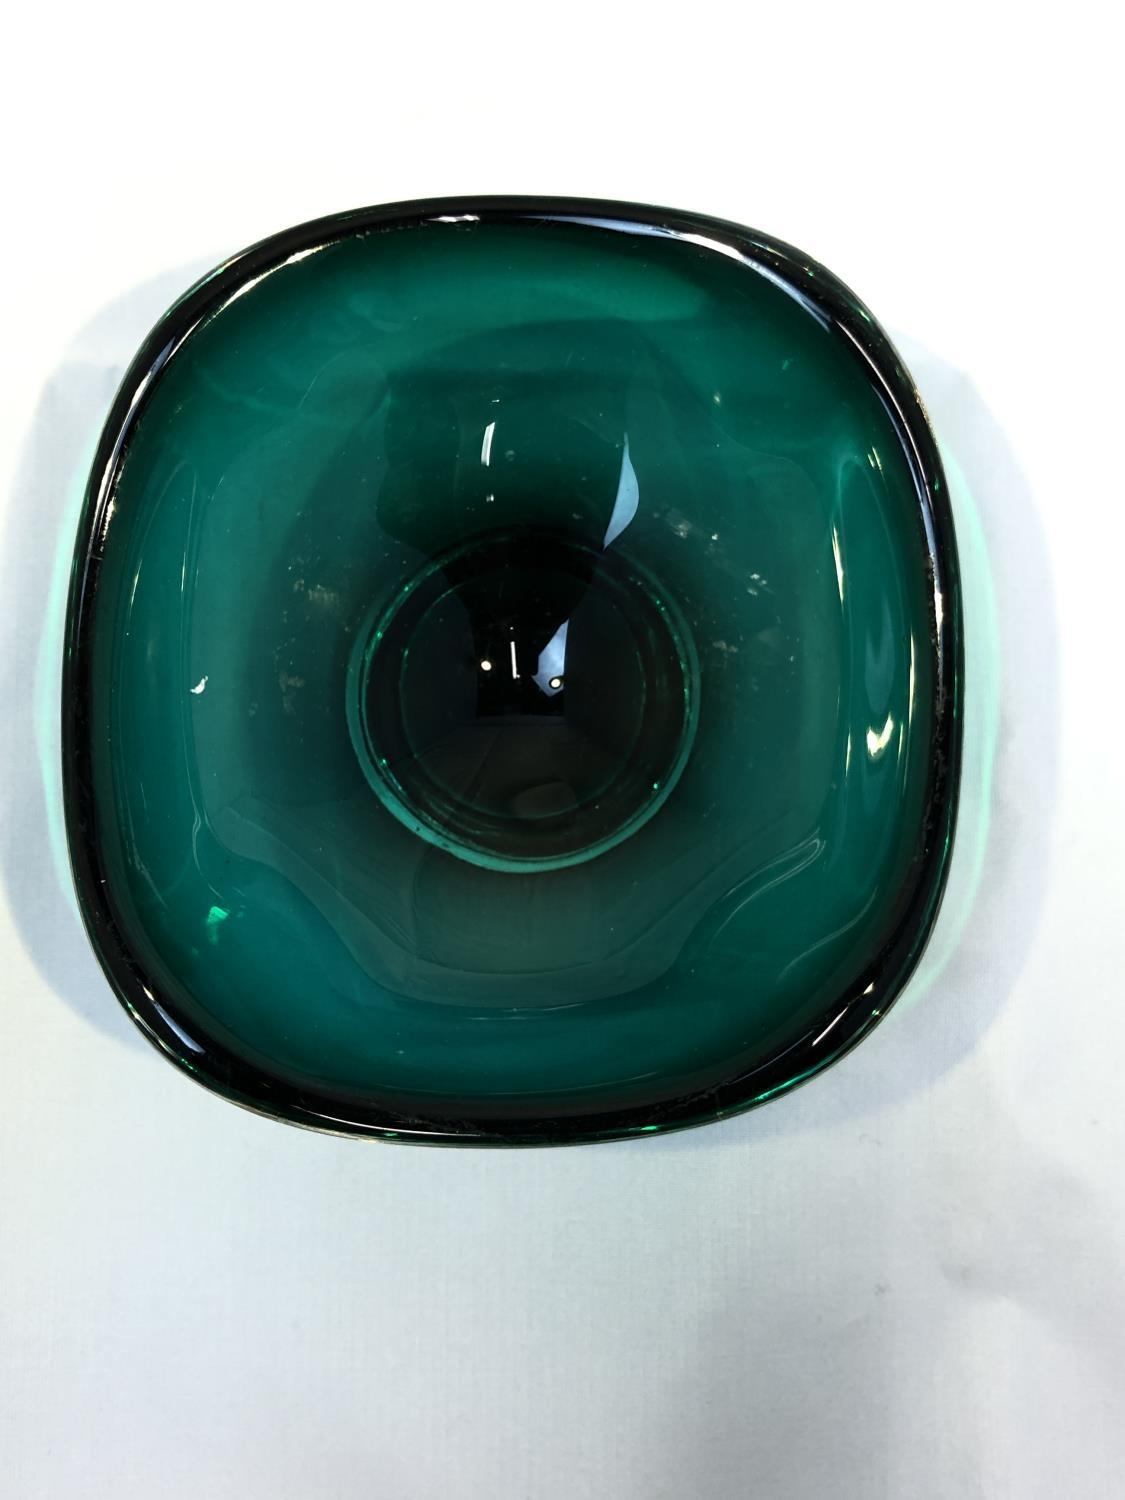 Geoffrey Baxter for Whitefriars - a 9493 arctic green glass vase with cut and polished neck, 24cm - Image 12 of 12